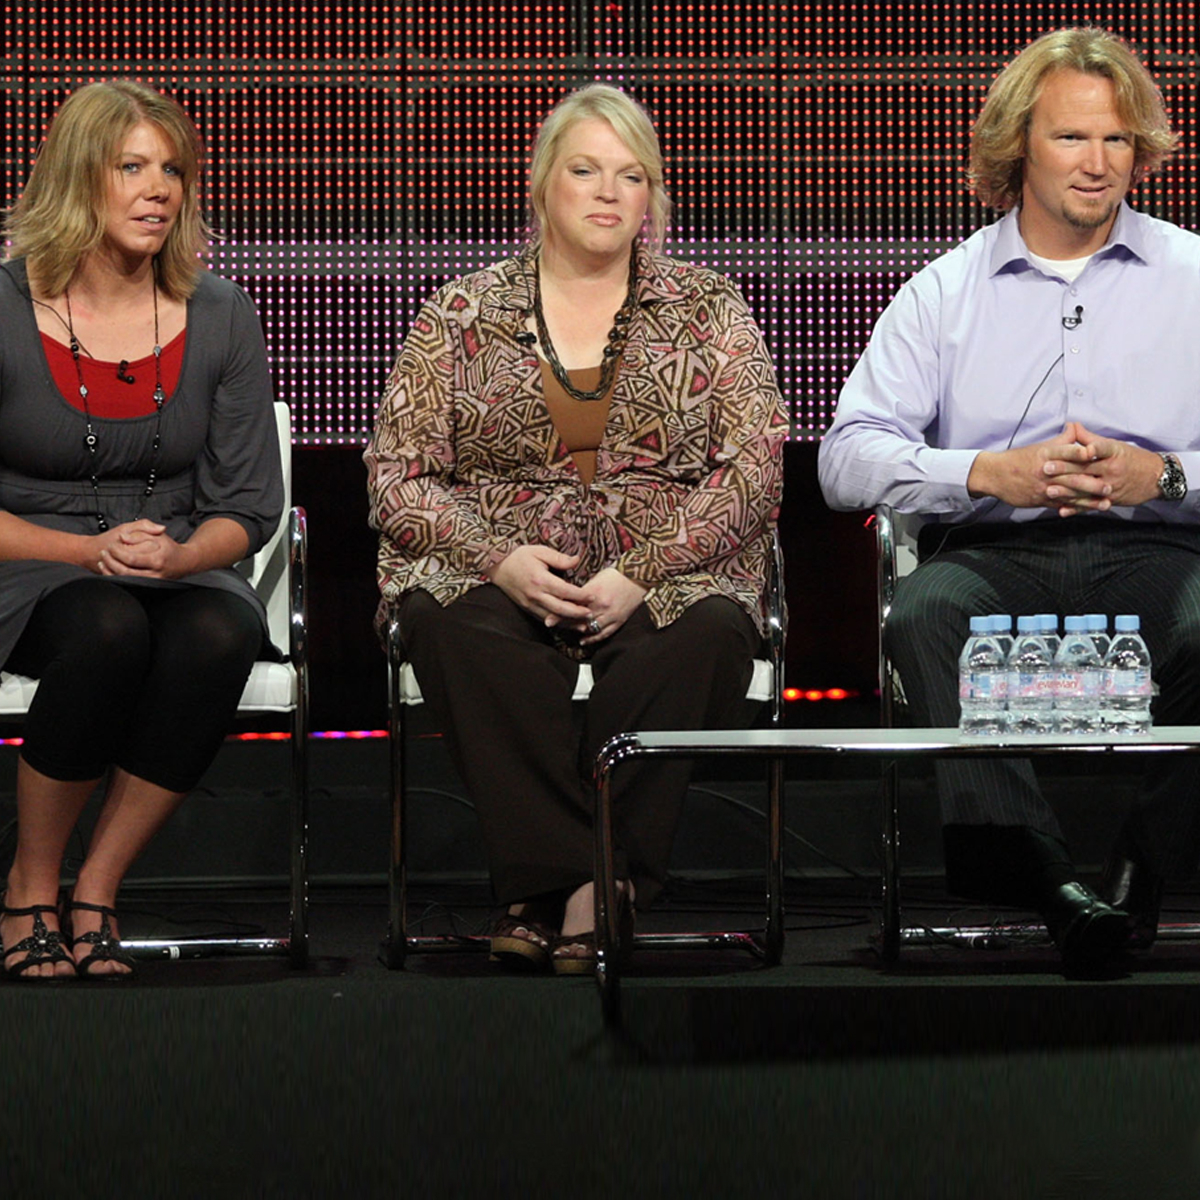 Sister Wives' star loses three spouses in a year, more splits of 2022, Gallery